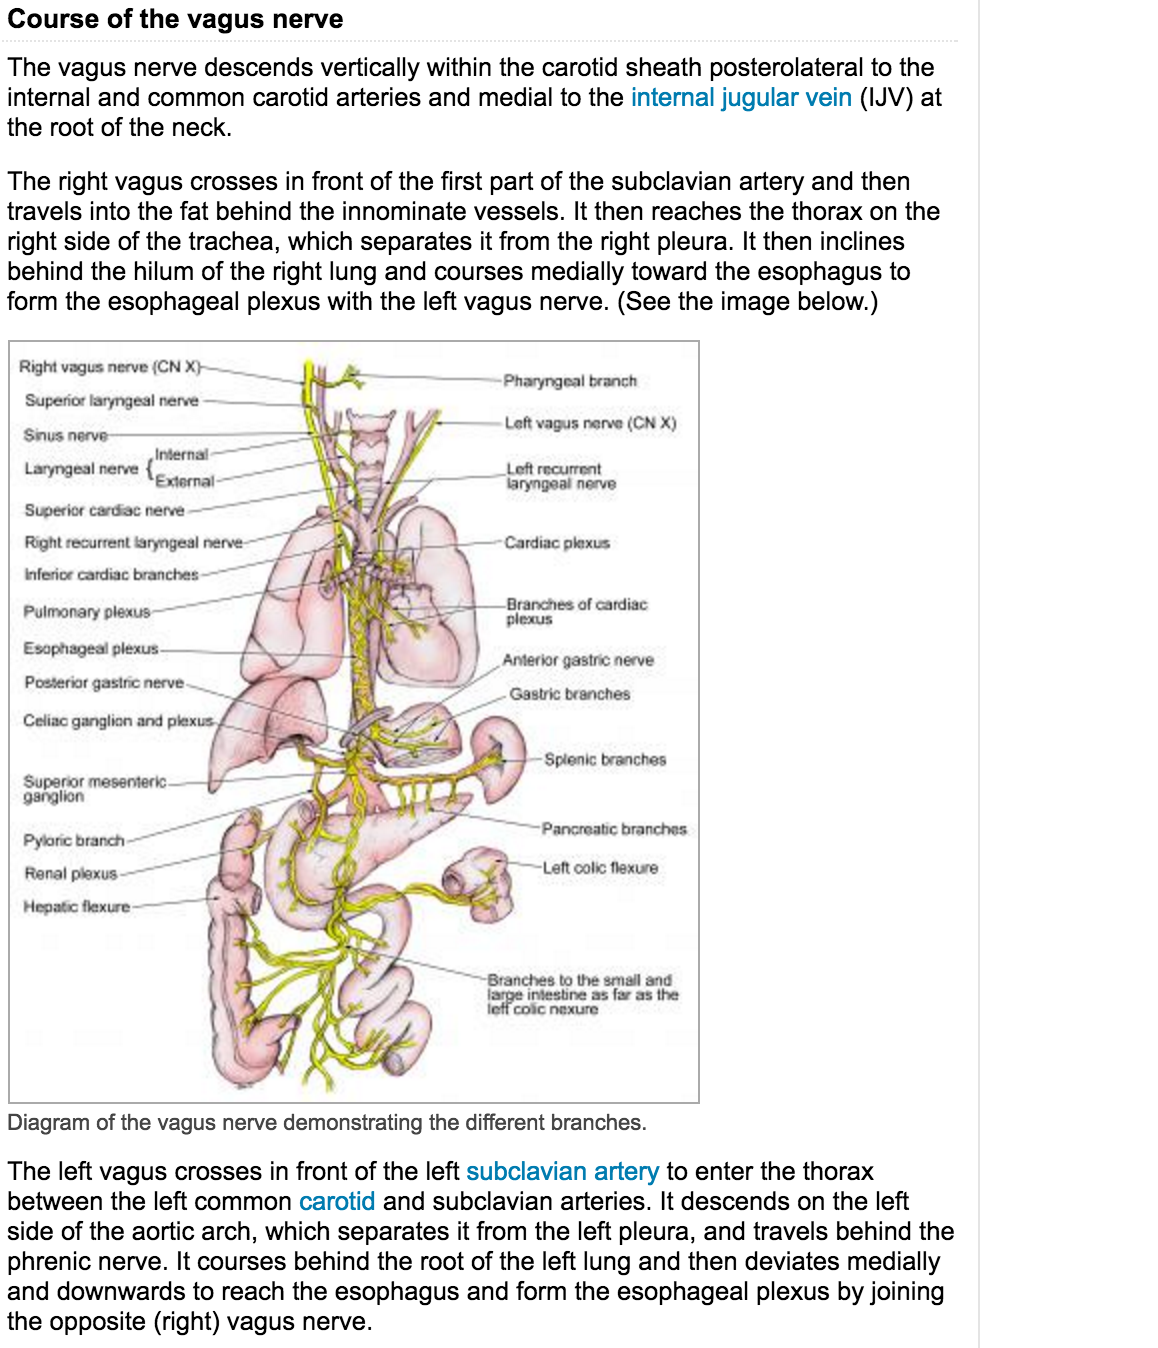 The gastric branches (rami gastrici) supply the stomach. The right